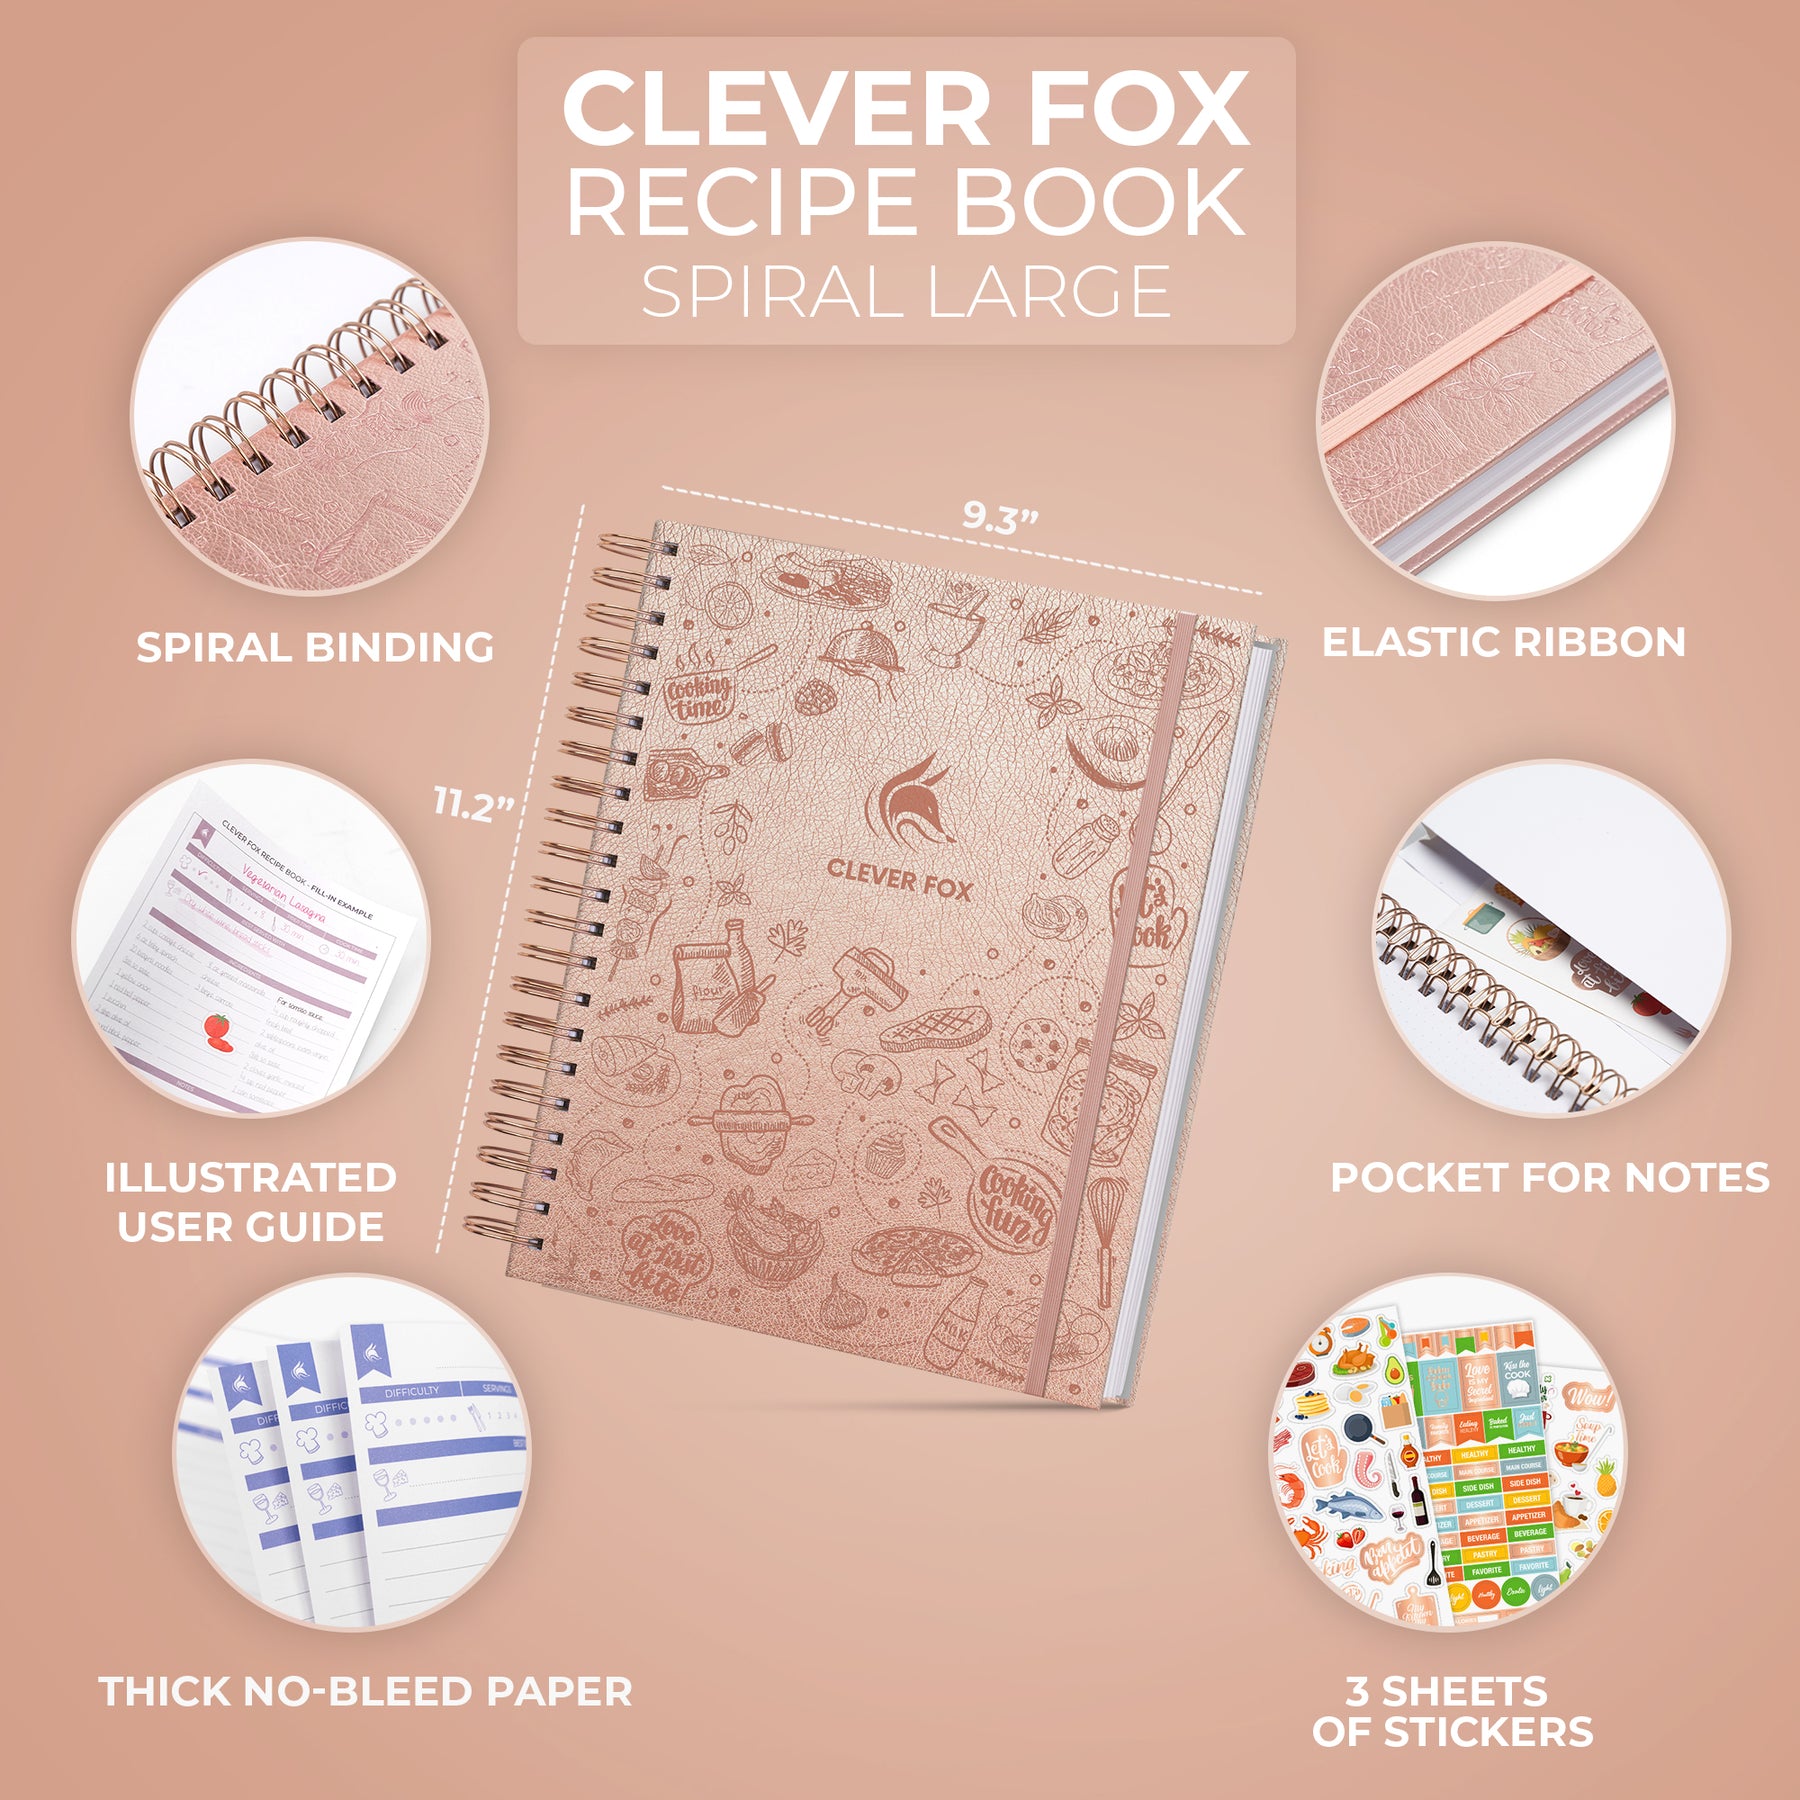 Clever Fox Recipe Book - Make Your Own Family Cookbook & Blank Recipe Notebook Organizer, Empty Cooking Journal to Write in Reci